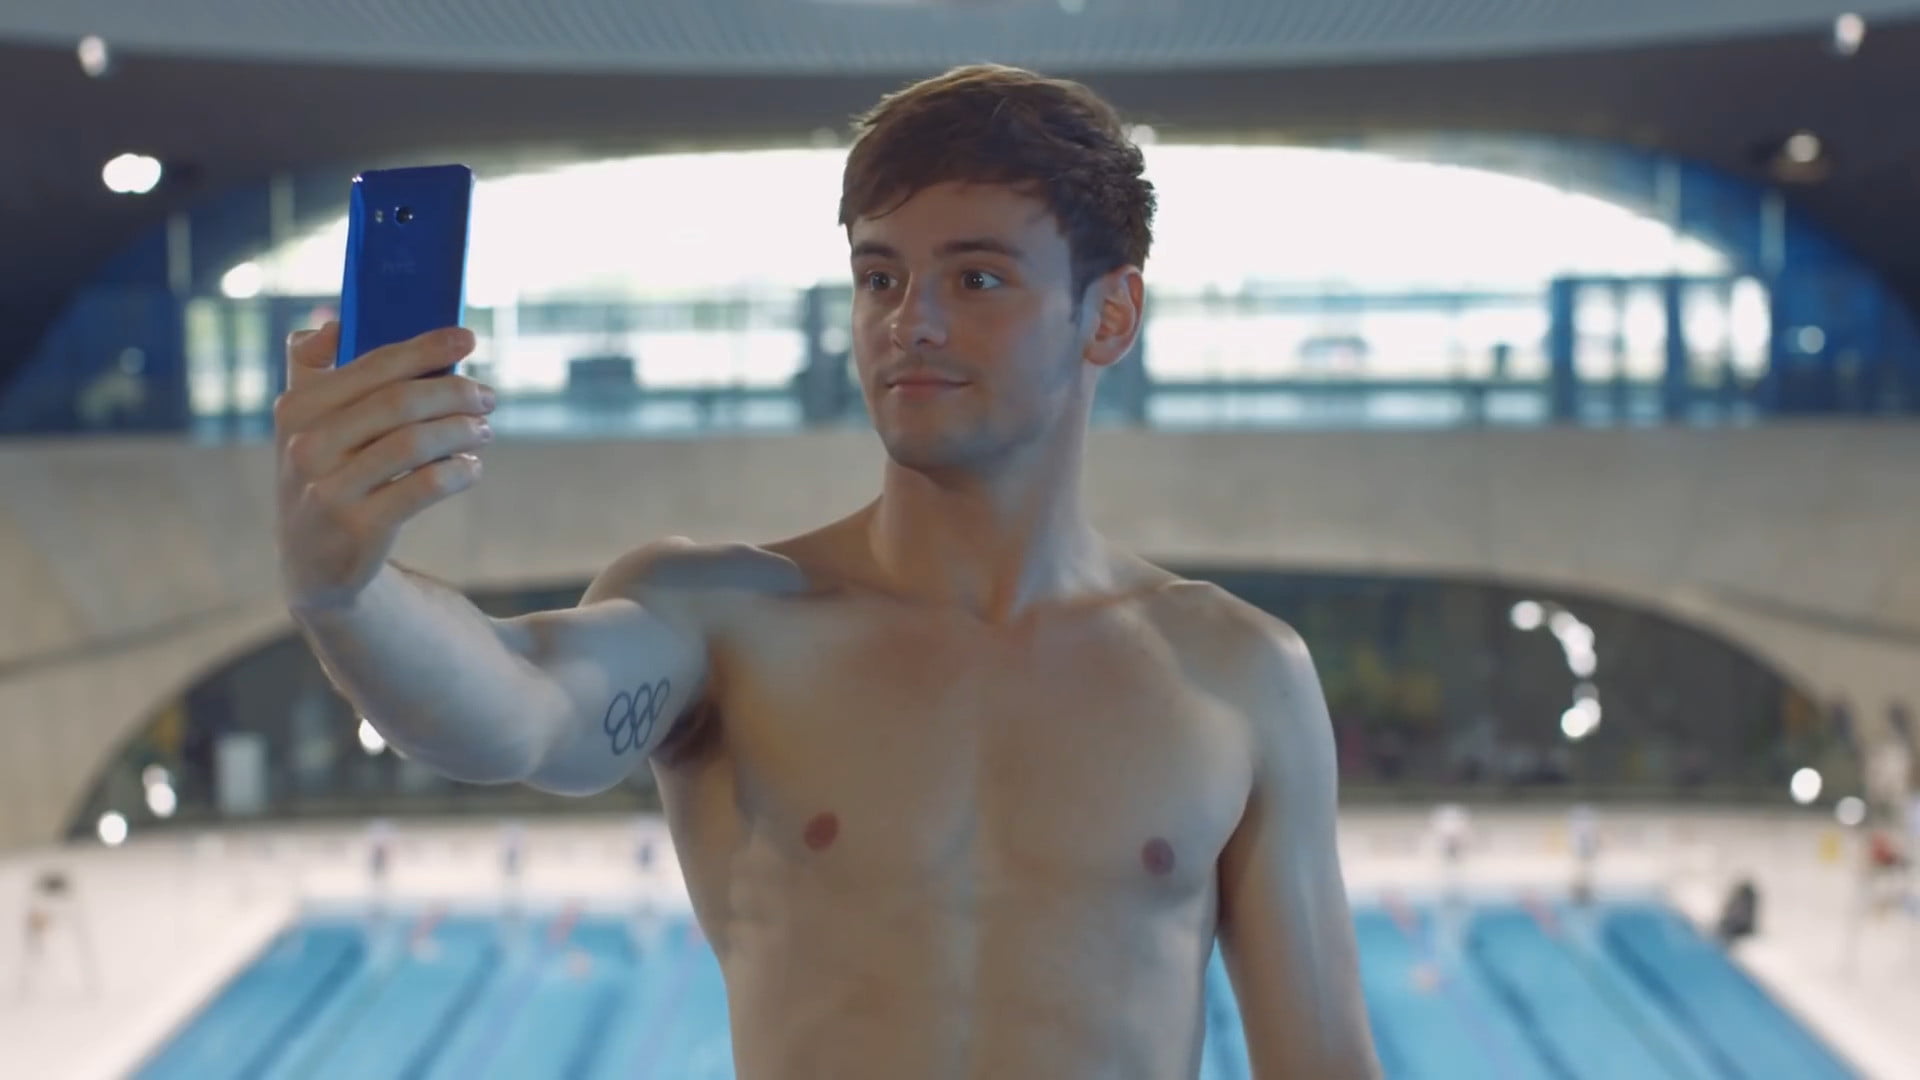 In England, banned advertising HTC U11 with an Olympic swimmer